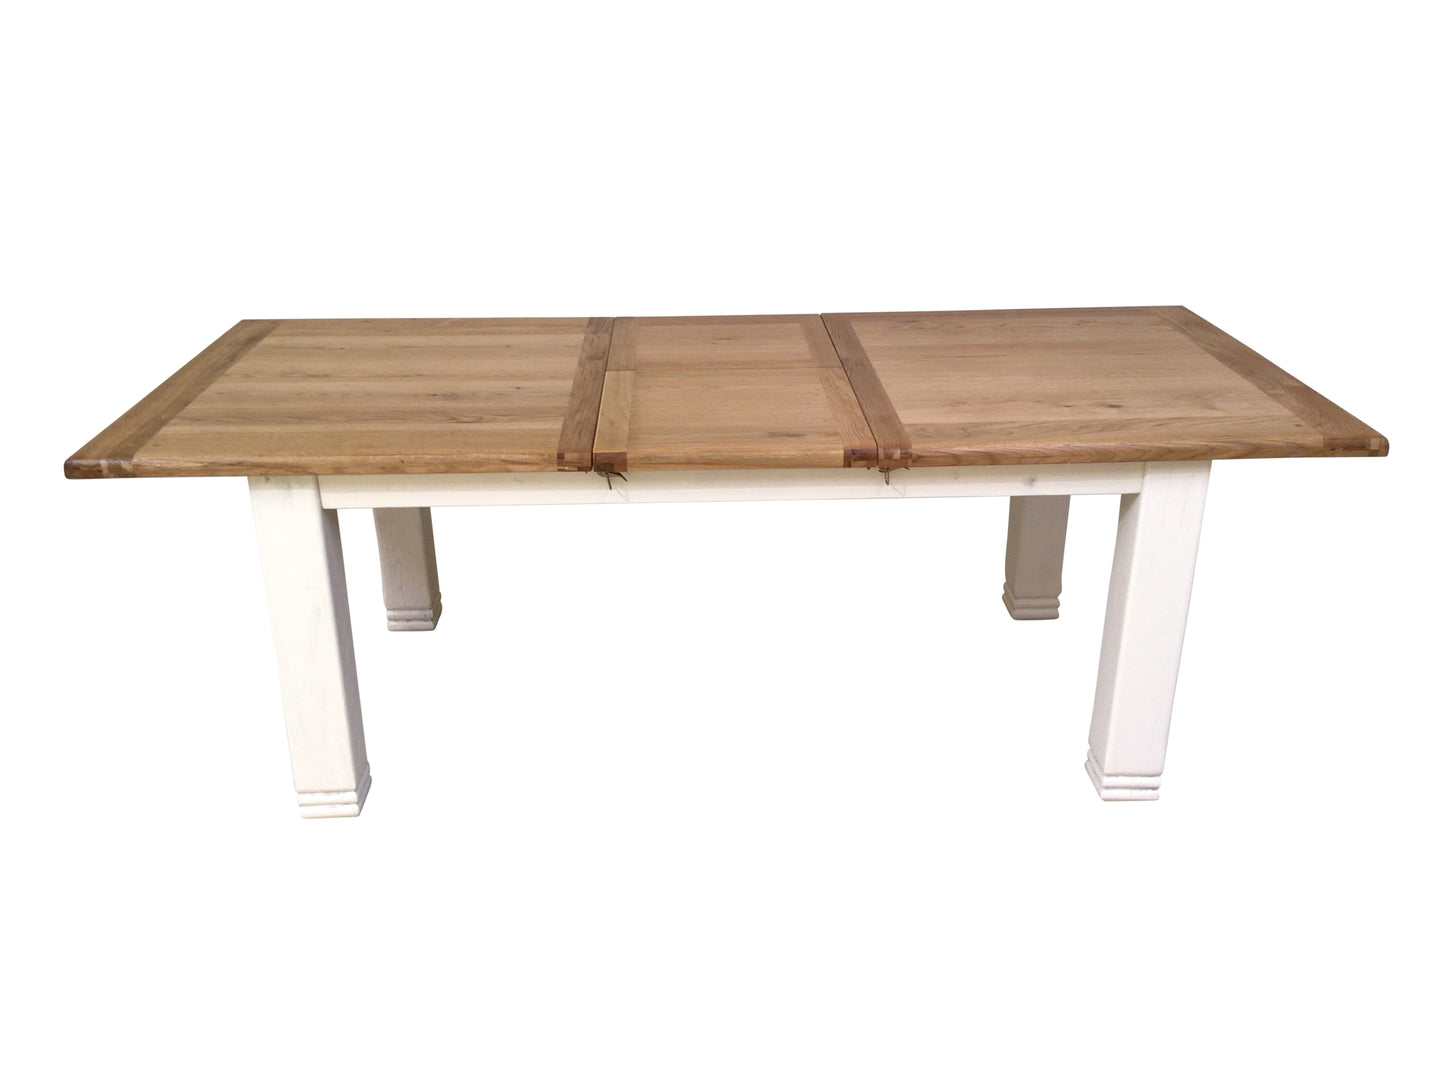 Danube Oak 1.8m Extension Dining Set painted white